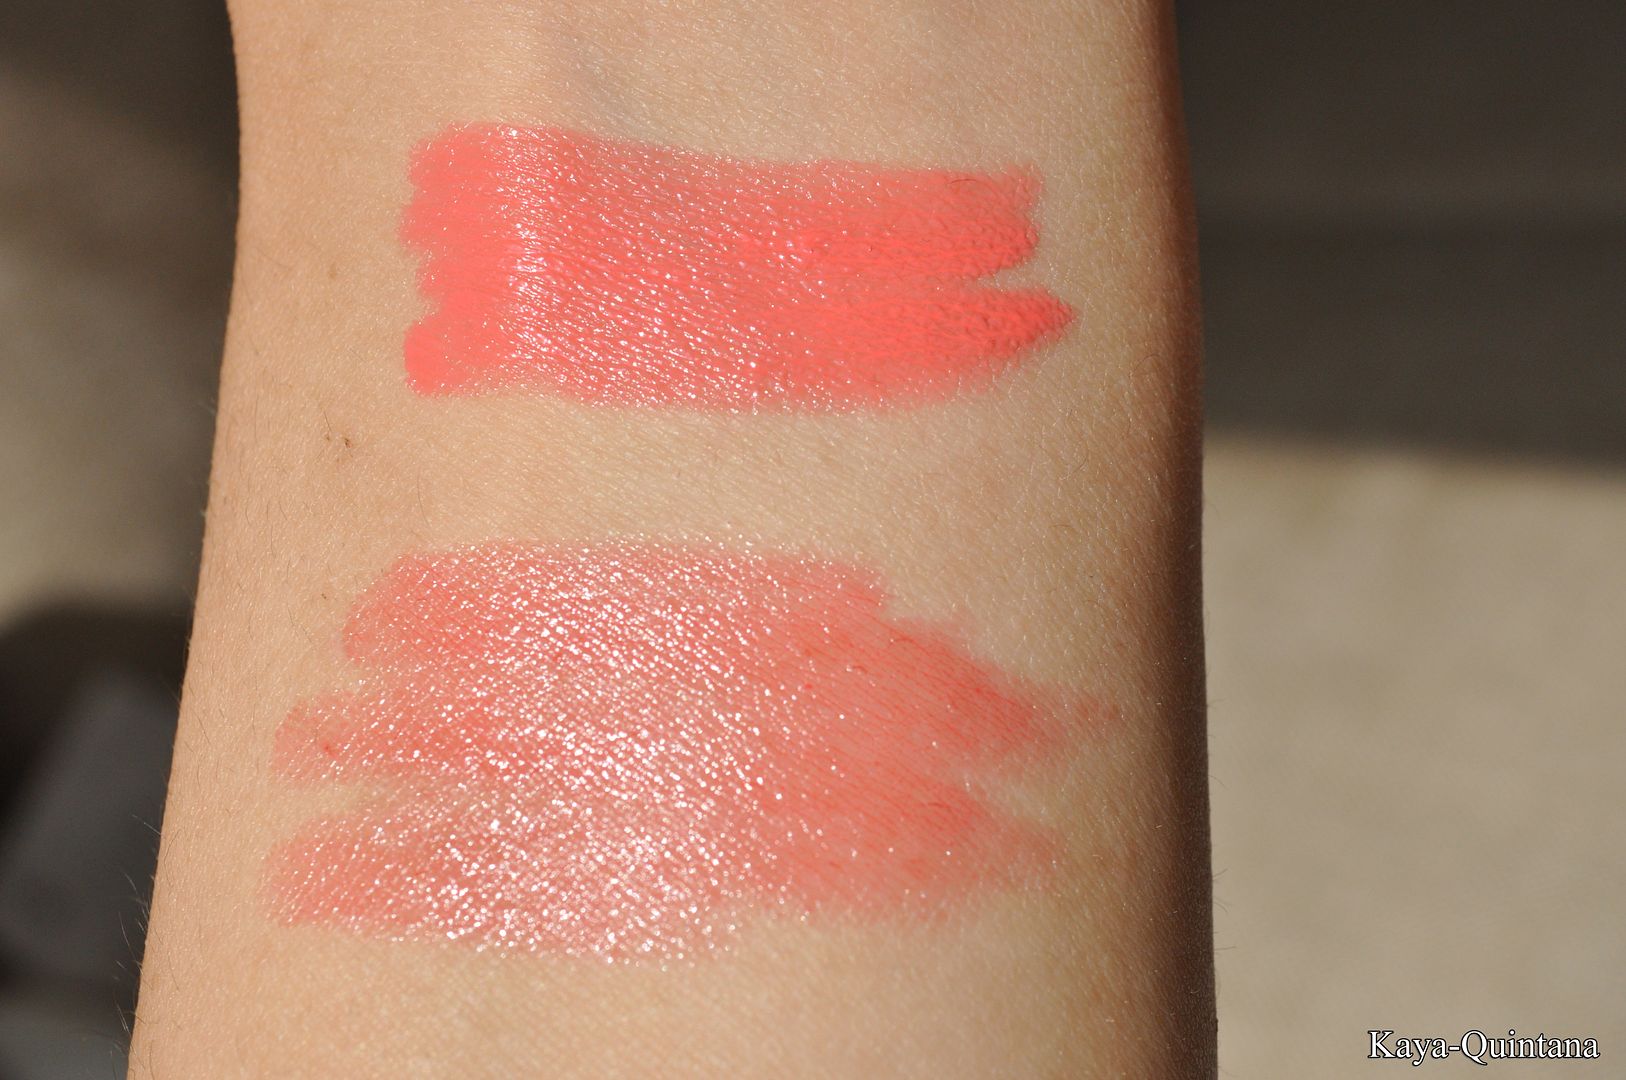 bourjois color boost swatches